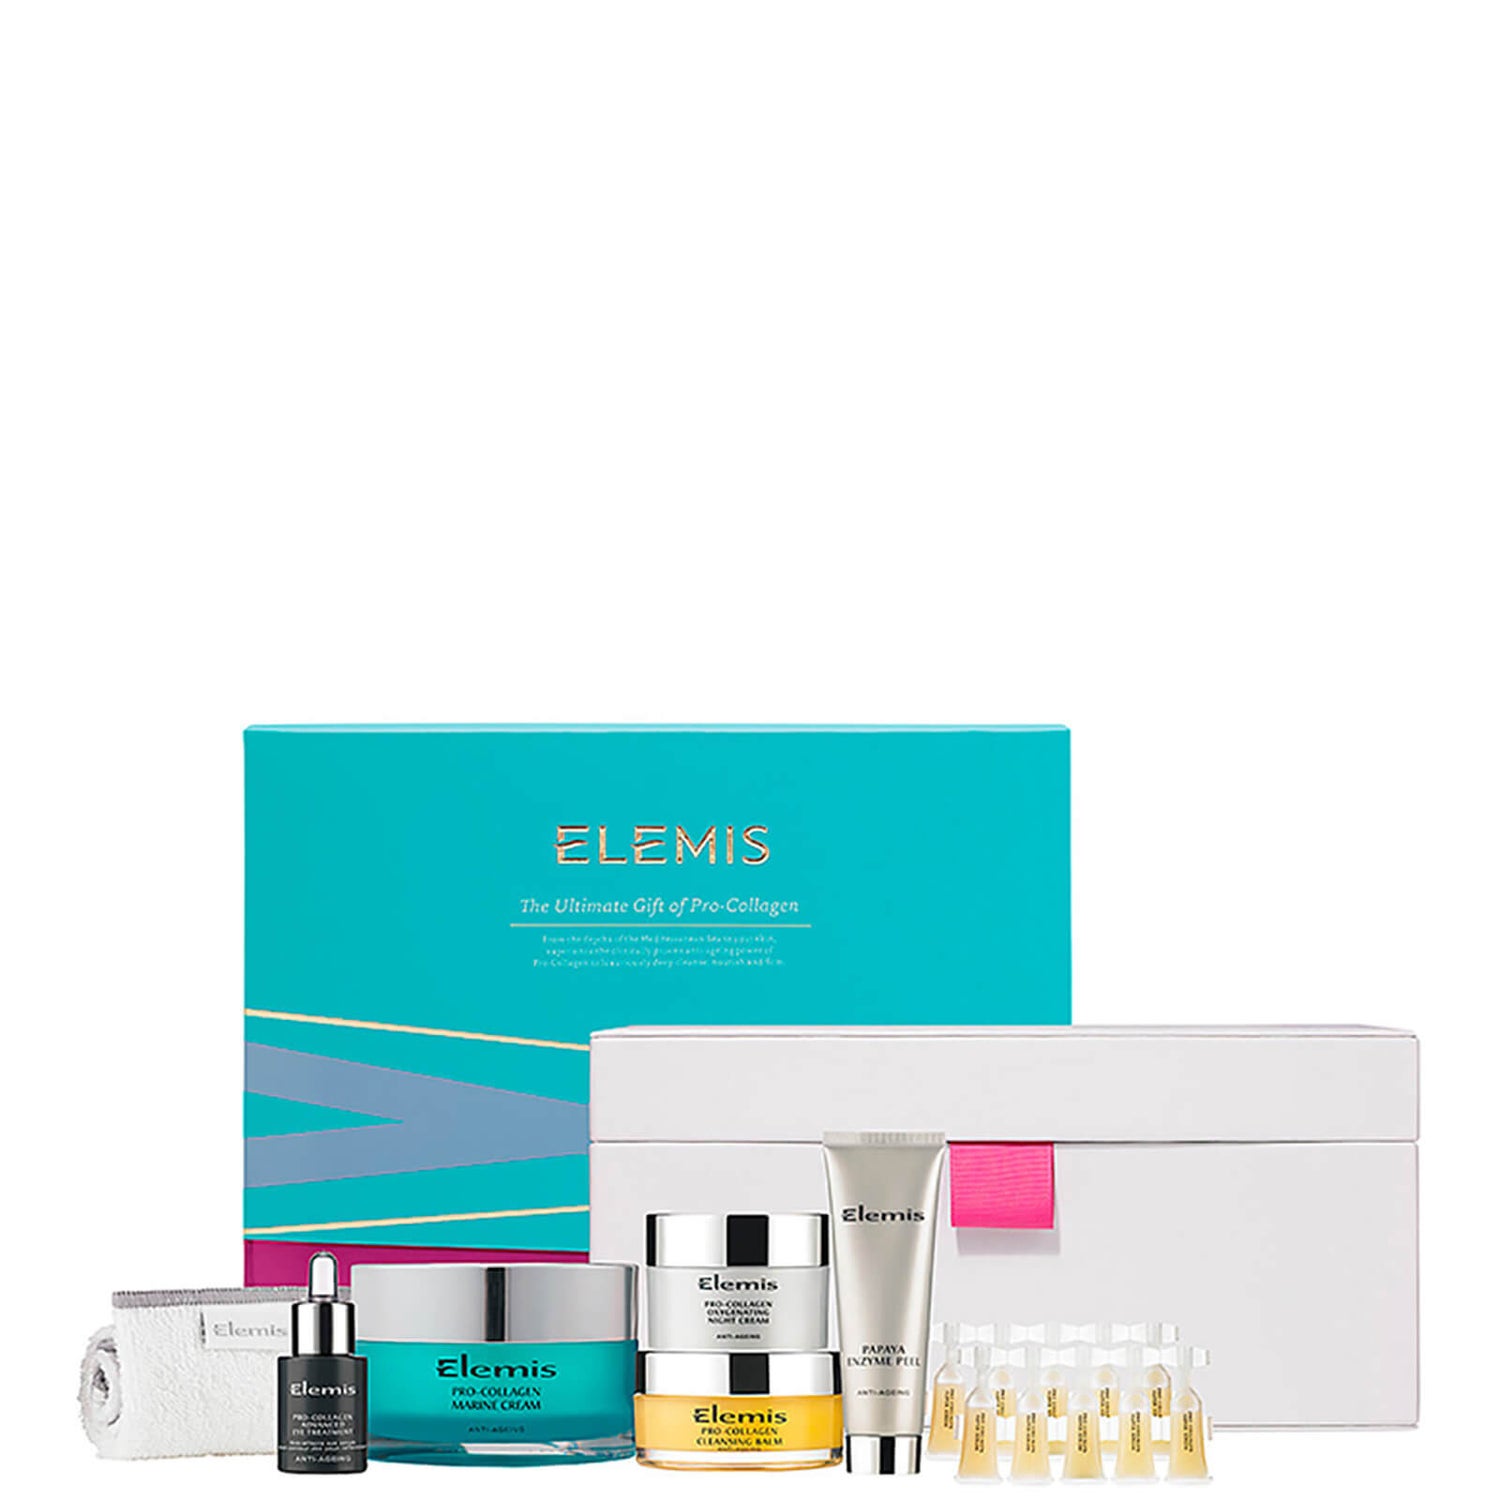 Elemis The Ultimate Gift Of Pro-Collagen